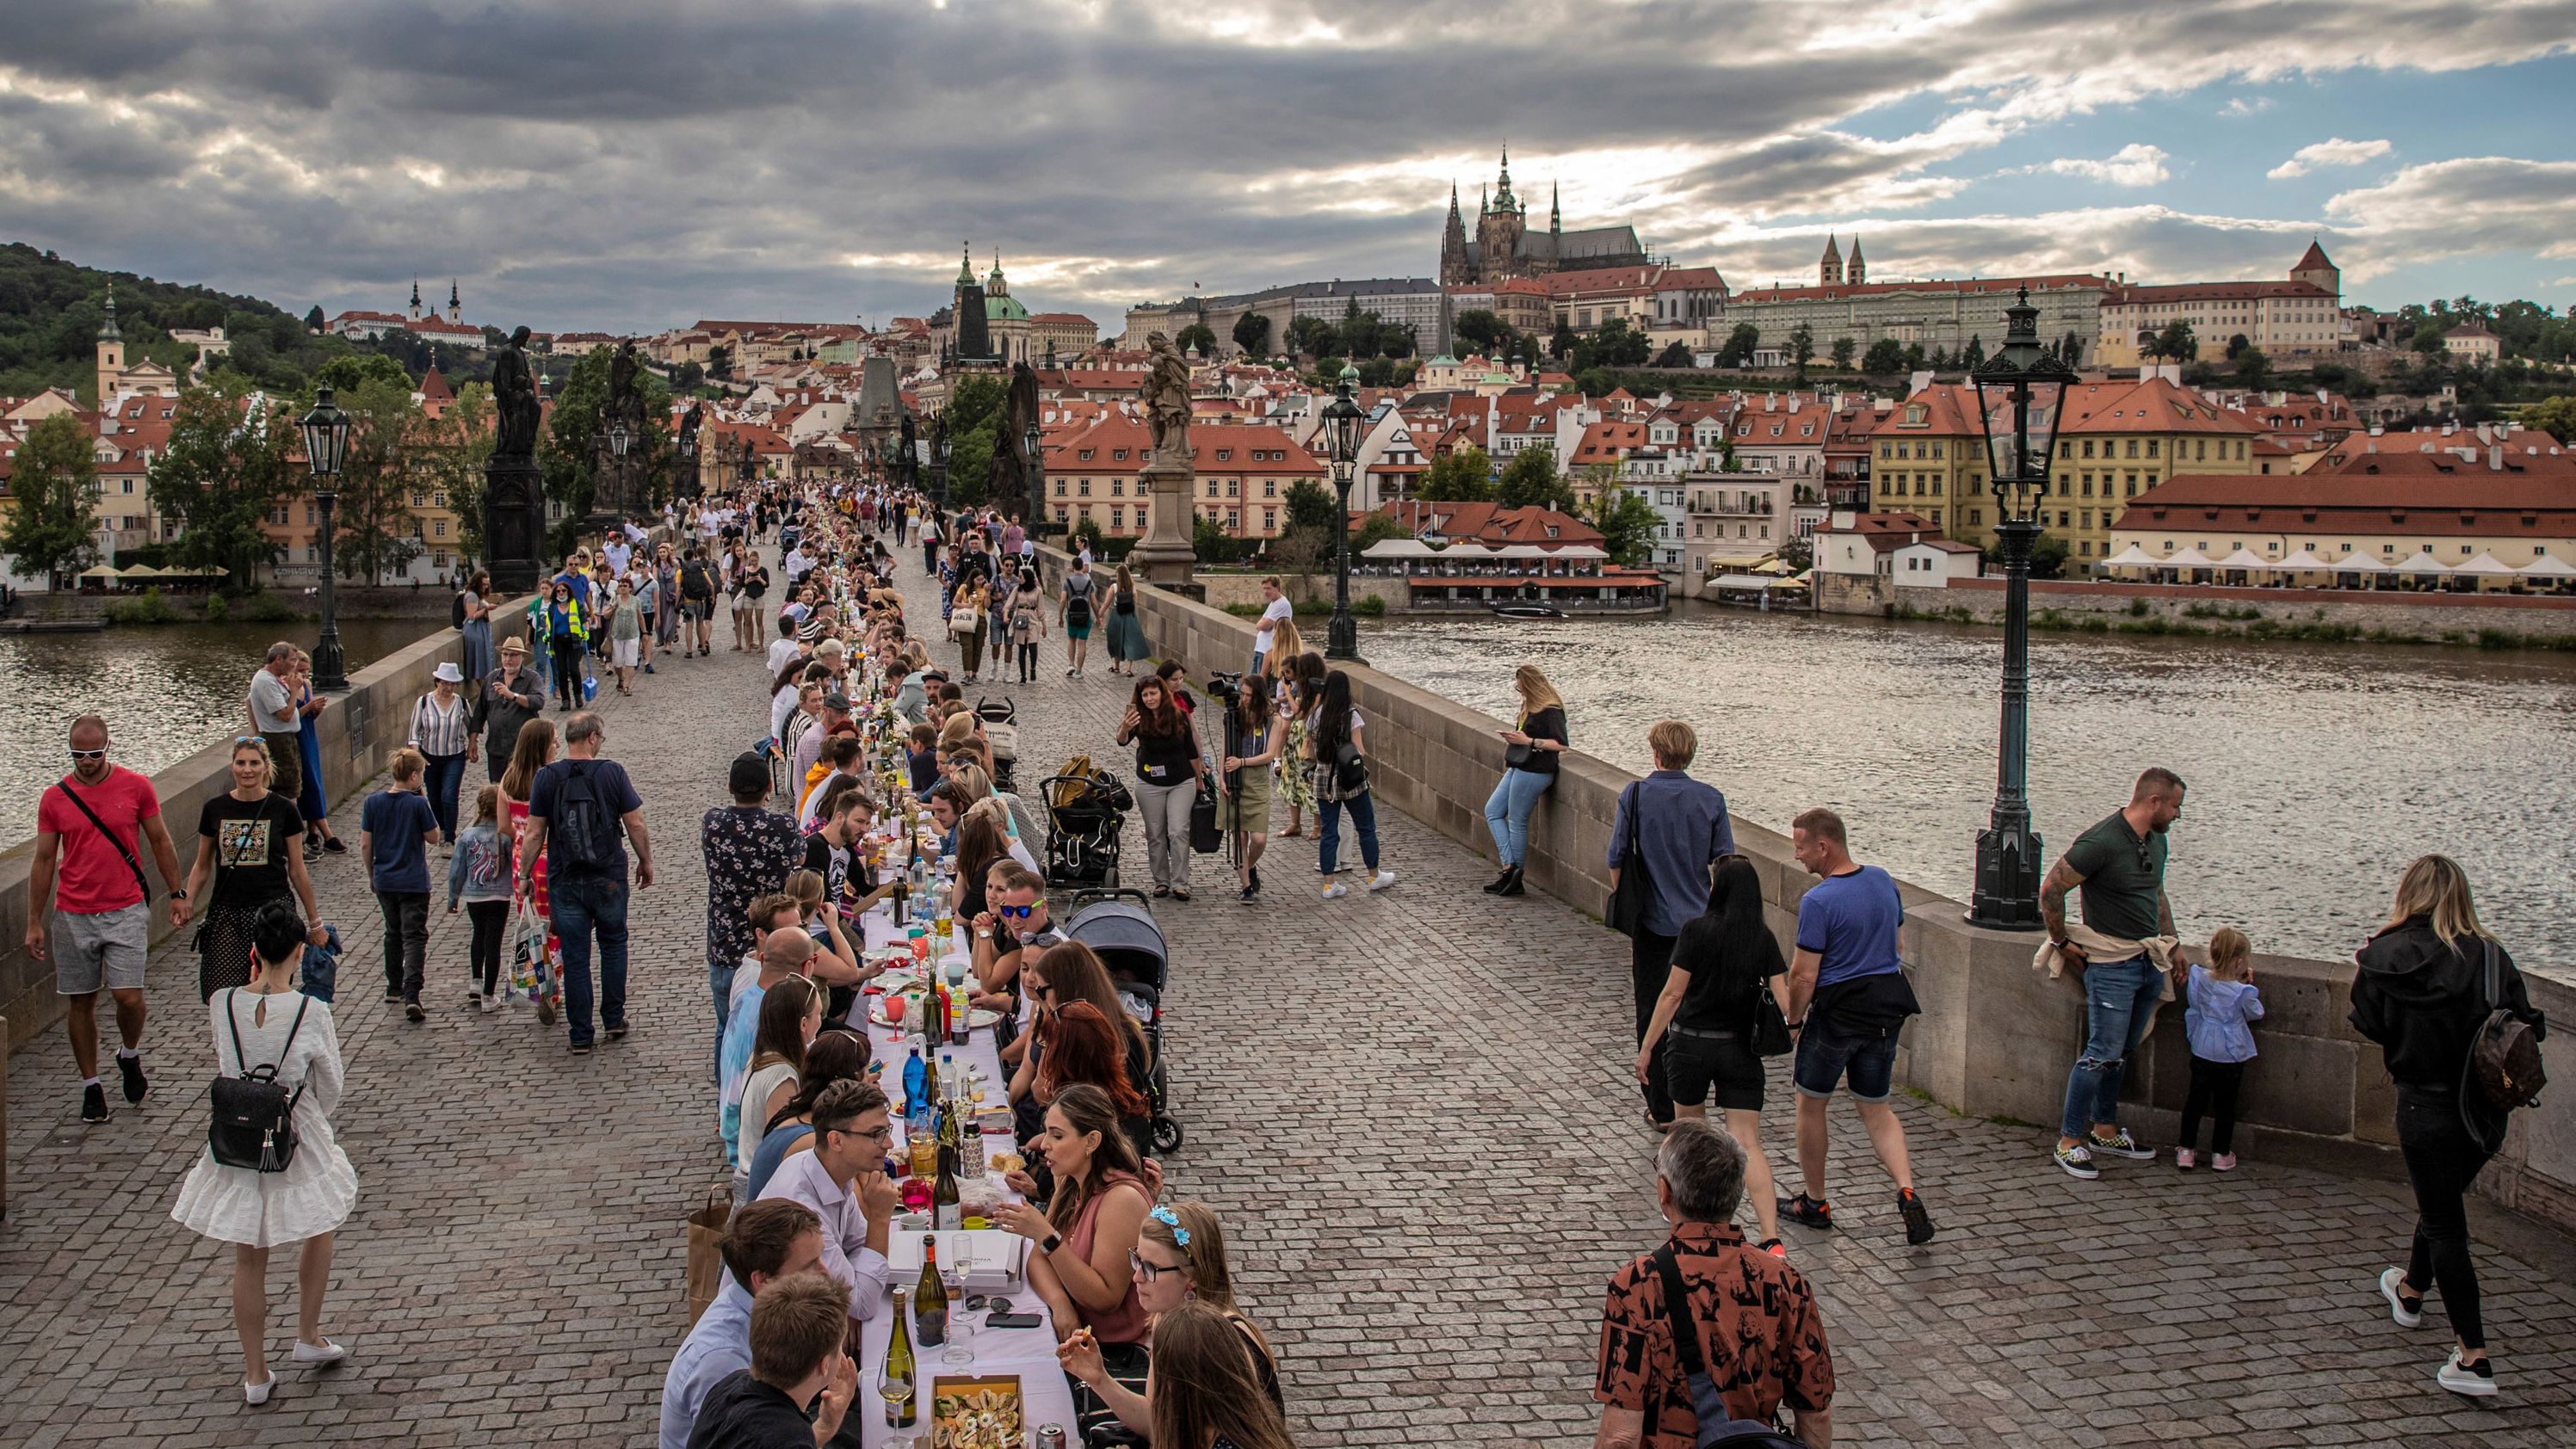 People sit at a giant table on the Charles Bridge in Prague, Czech Republic, on June 30. To celebrate the end of the country's lockdown, cafe owner Ondrej Kobza organized <a href="https://www.cnn.com/travel/article/czech-public-dinner-lockdown-scli-intl/index.html" target="_blank">the dinner party.</a> "We want to celebrate the end of the coronavirus crisis with people meeting up and showing they're no longer afraid to meet others. That they aren't afraid to accept a bite of a sandwich from someone," Kobza told the Agence France-Presse news agency. The Czech Republic was quick to implement a lockdown at the start of the outbreak and became one of the first countries to tell its citizens to wear masks. That helped it avoid the worst of the pandemic and ease restrictions earlier than many other nations.